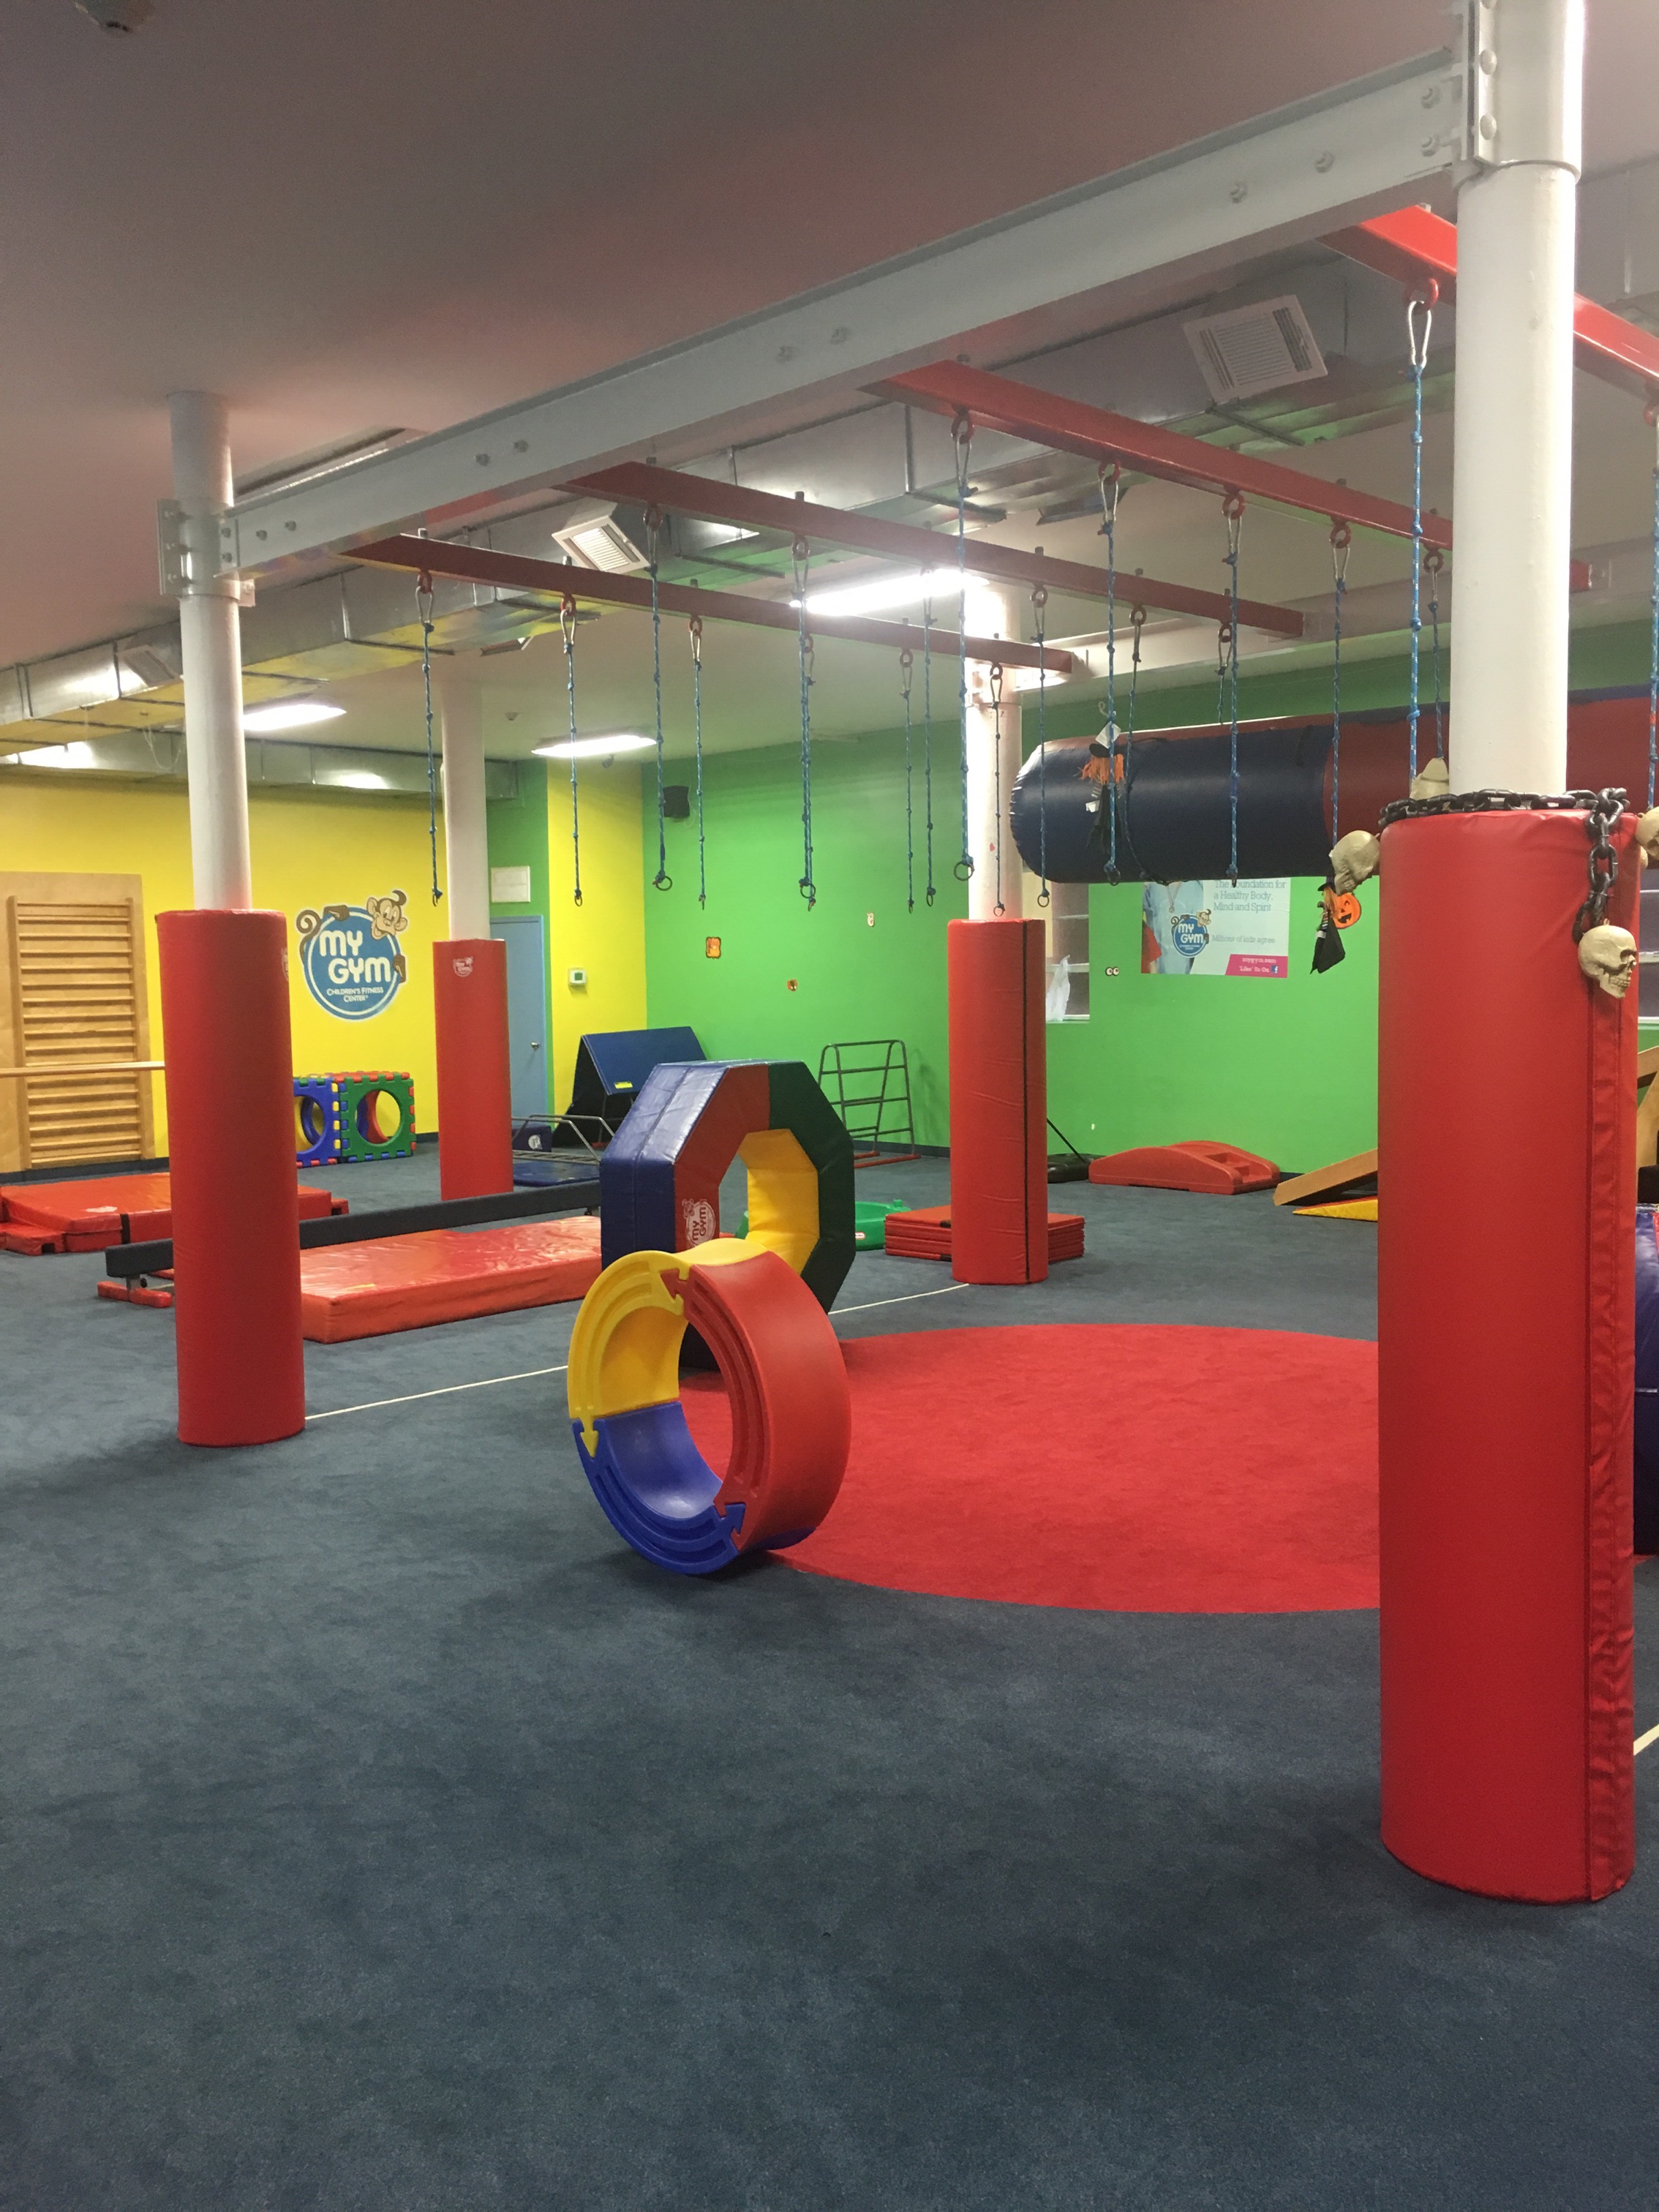 My Gym Birthday Party Venues in Jersey City